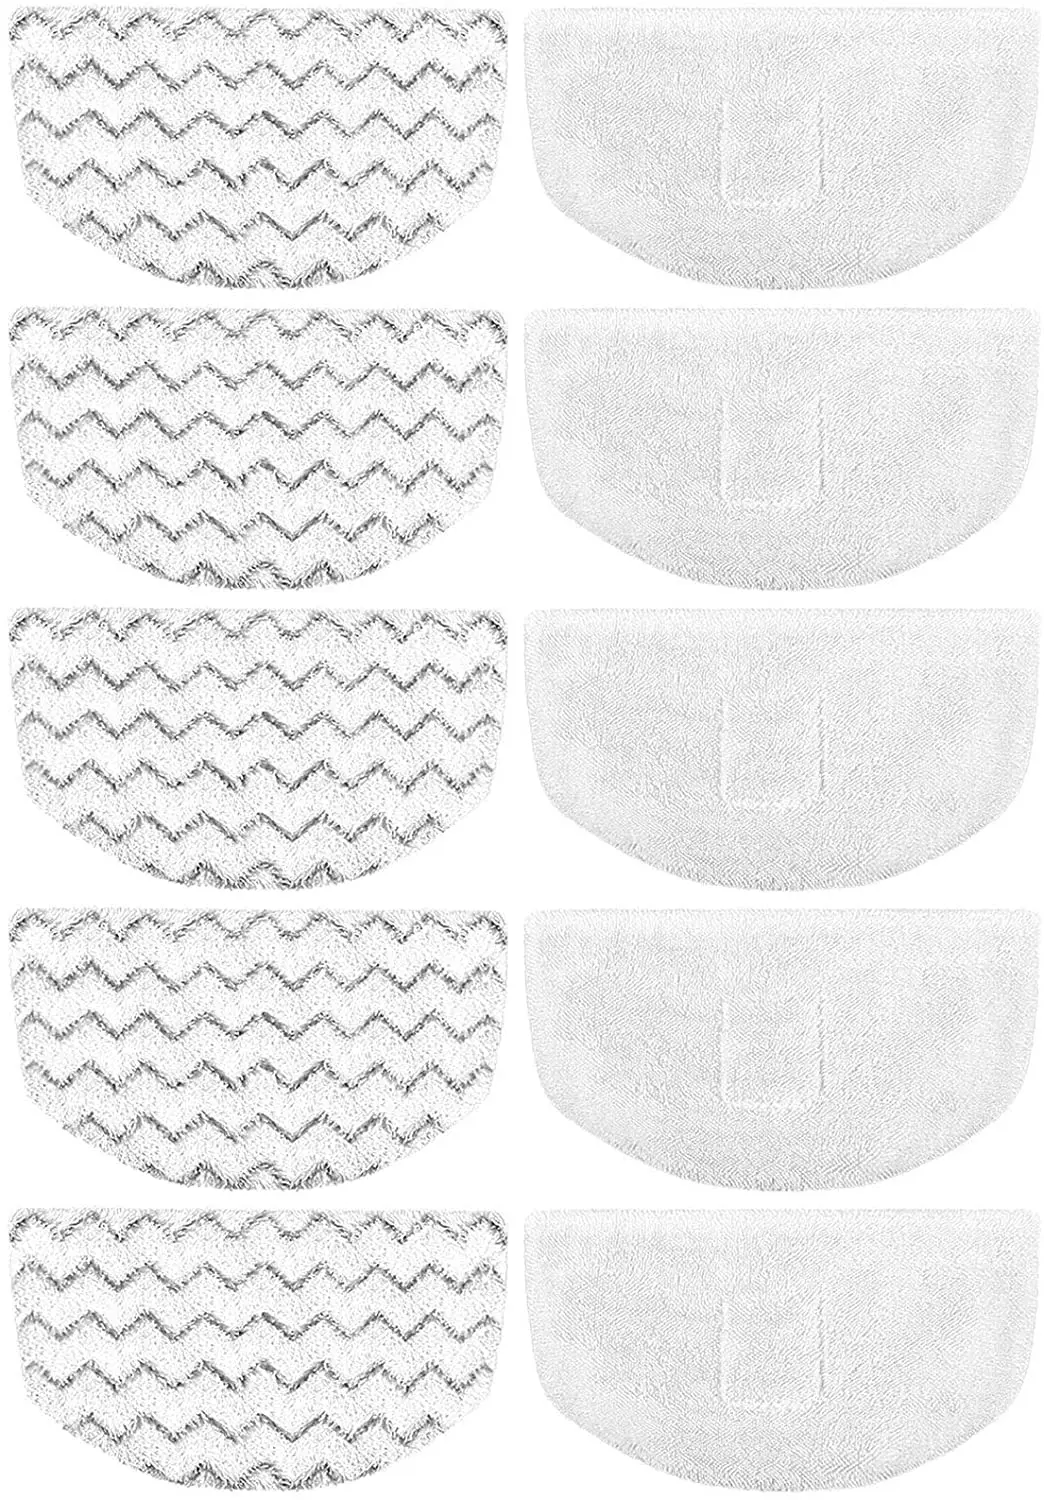 

10 Pack Steam Mop Replacement Pads for Bissell Powerfresh Steam Mop 1940 1806 1544 1440 2075 2685A 2814 Series, Model 19402